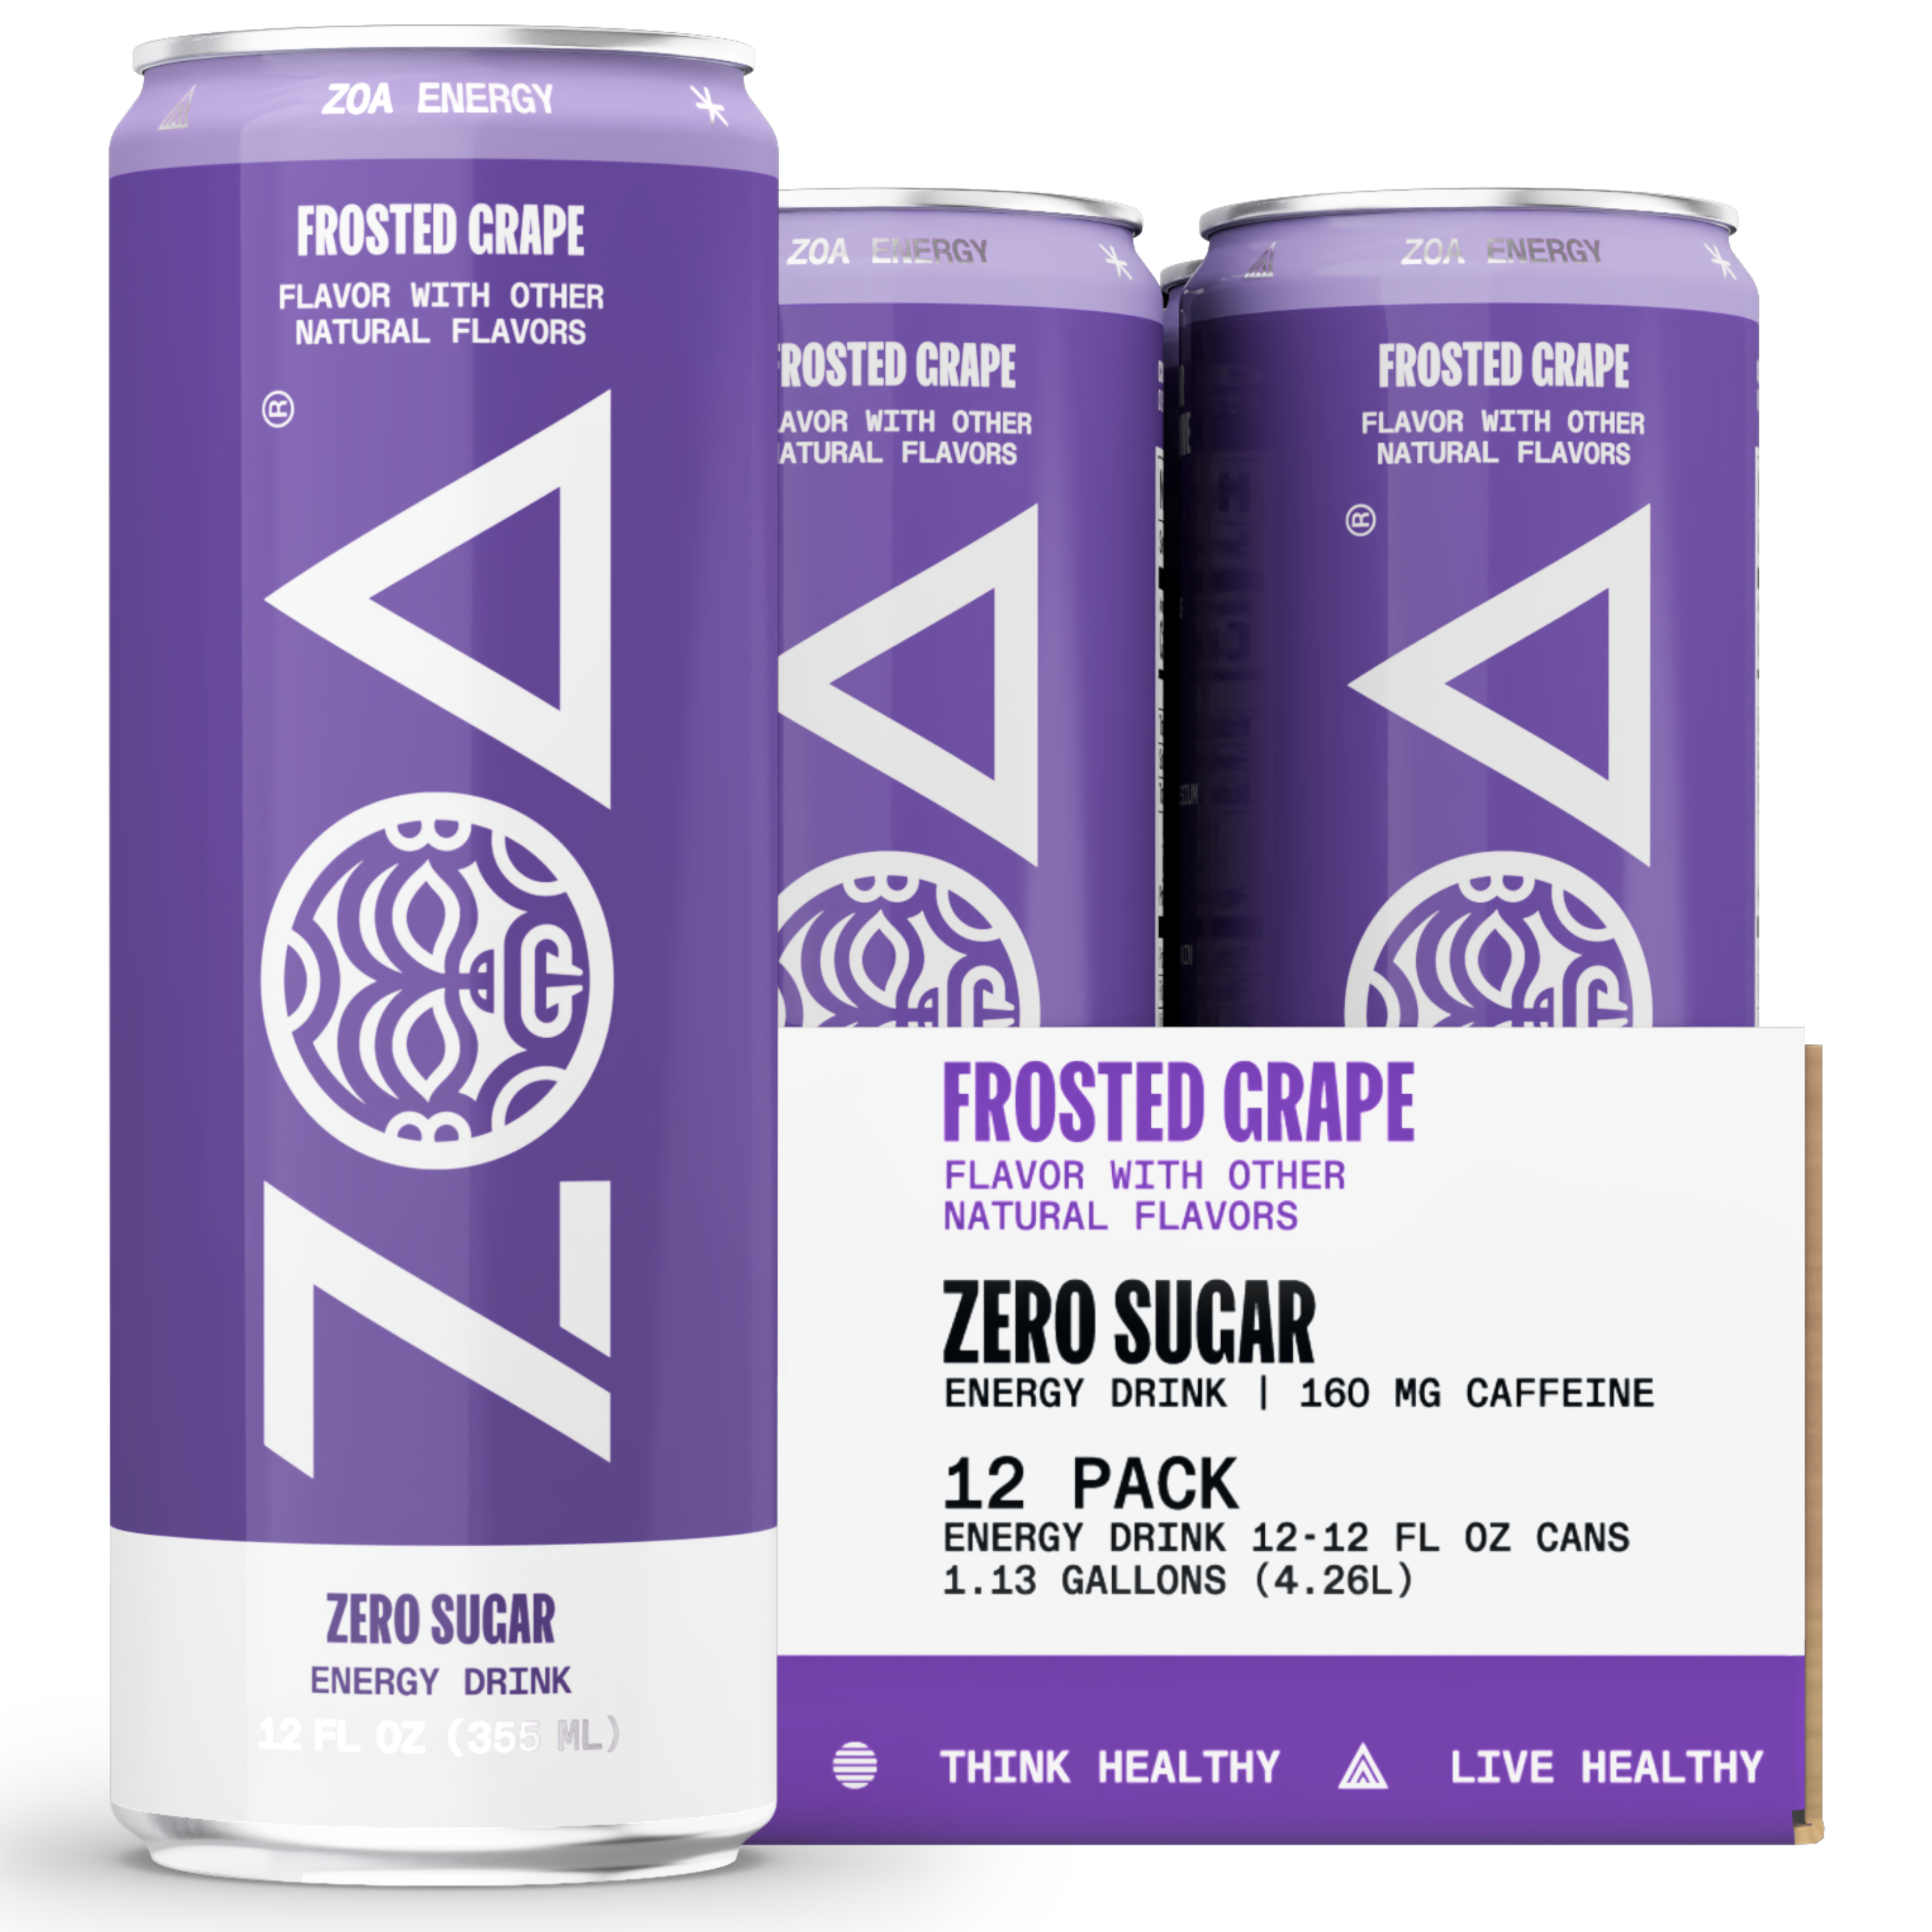 The Rock's Zoa energy drinks are under $2 a can 'til midnight